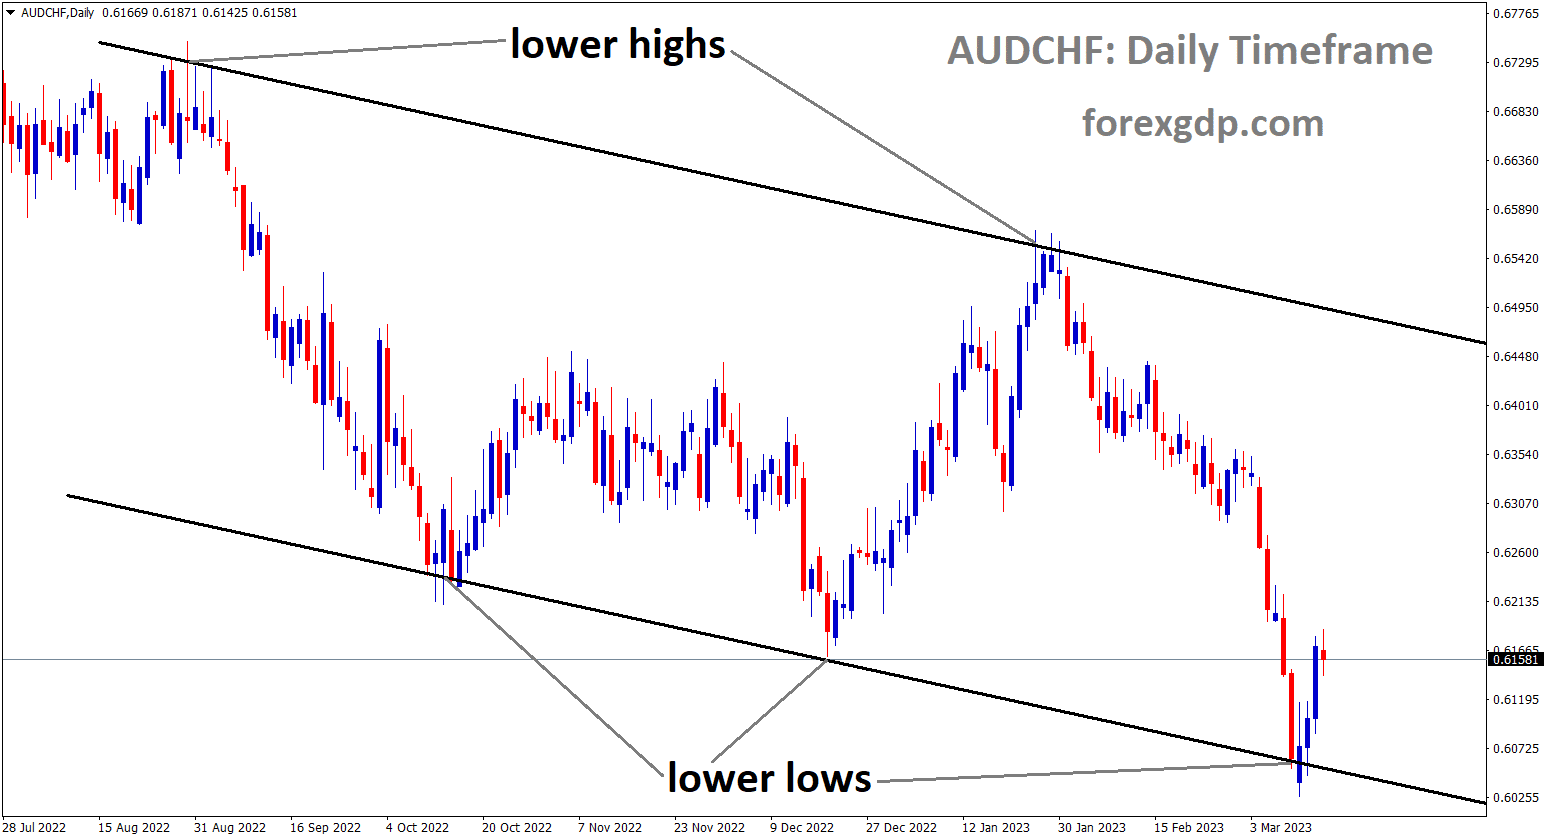 AUDCHF is moving in Descending channel and the market has rebounded from the lower low area of the channel.